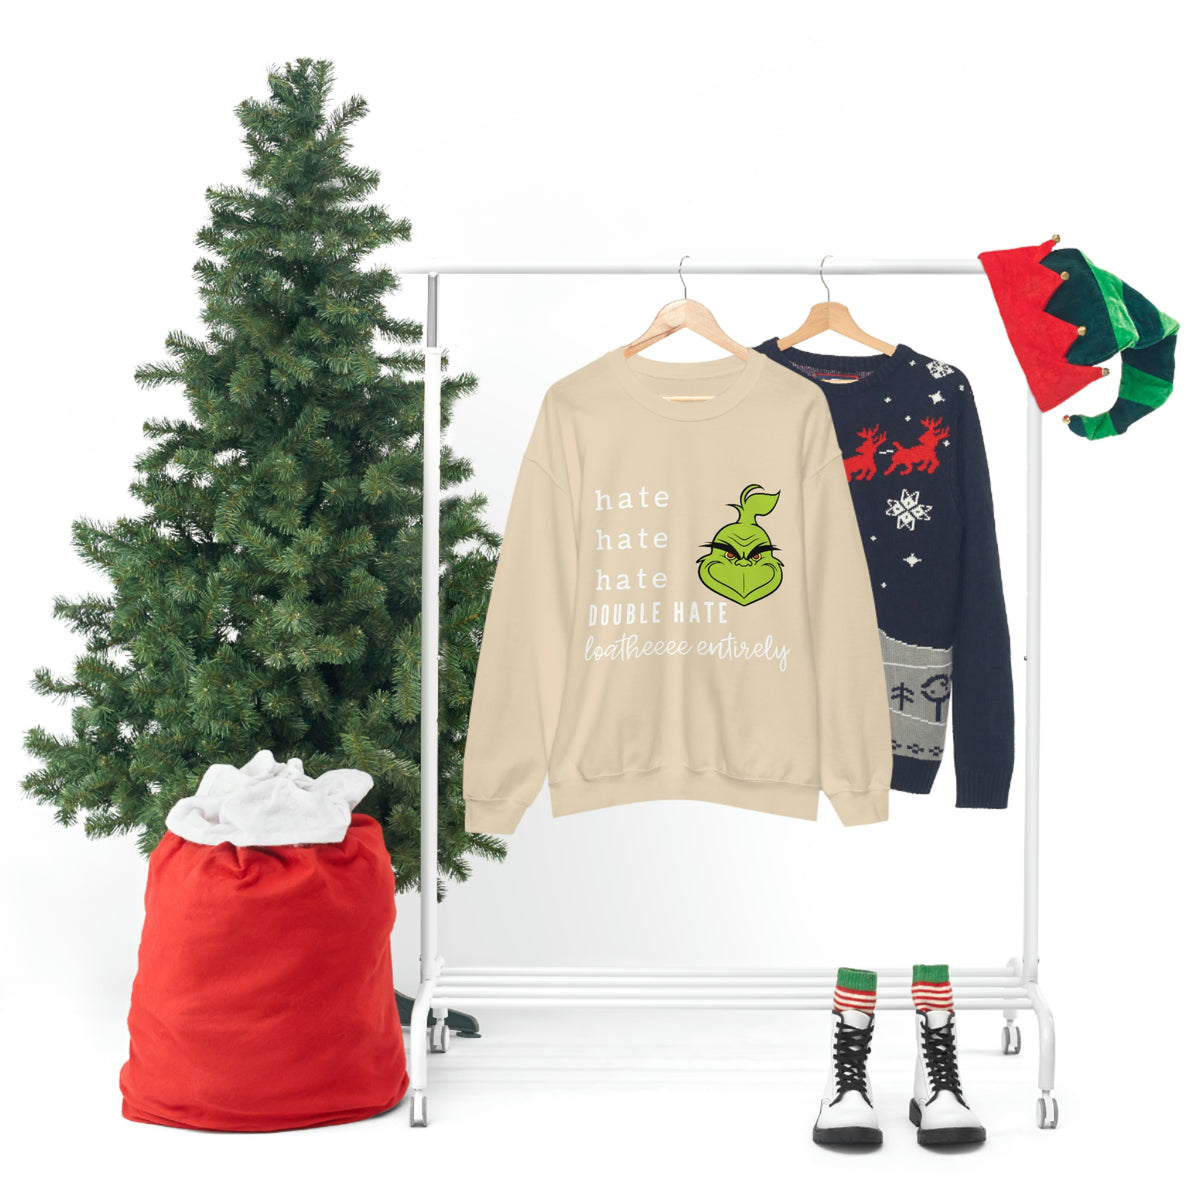 Hate, Hate, Hate, Double Hate, Loathe Entirely, The Grinch Holiday Crewneck, Oversized Sweatshirt, Grinch Lover Gifts